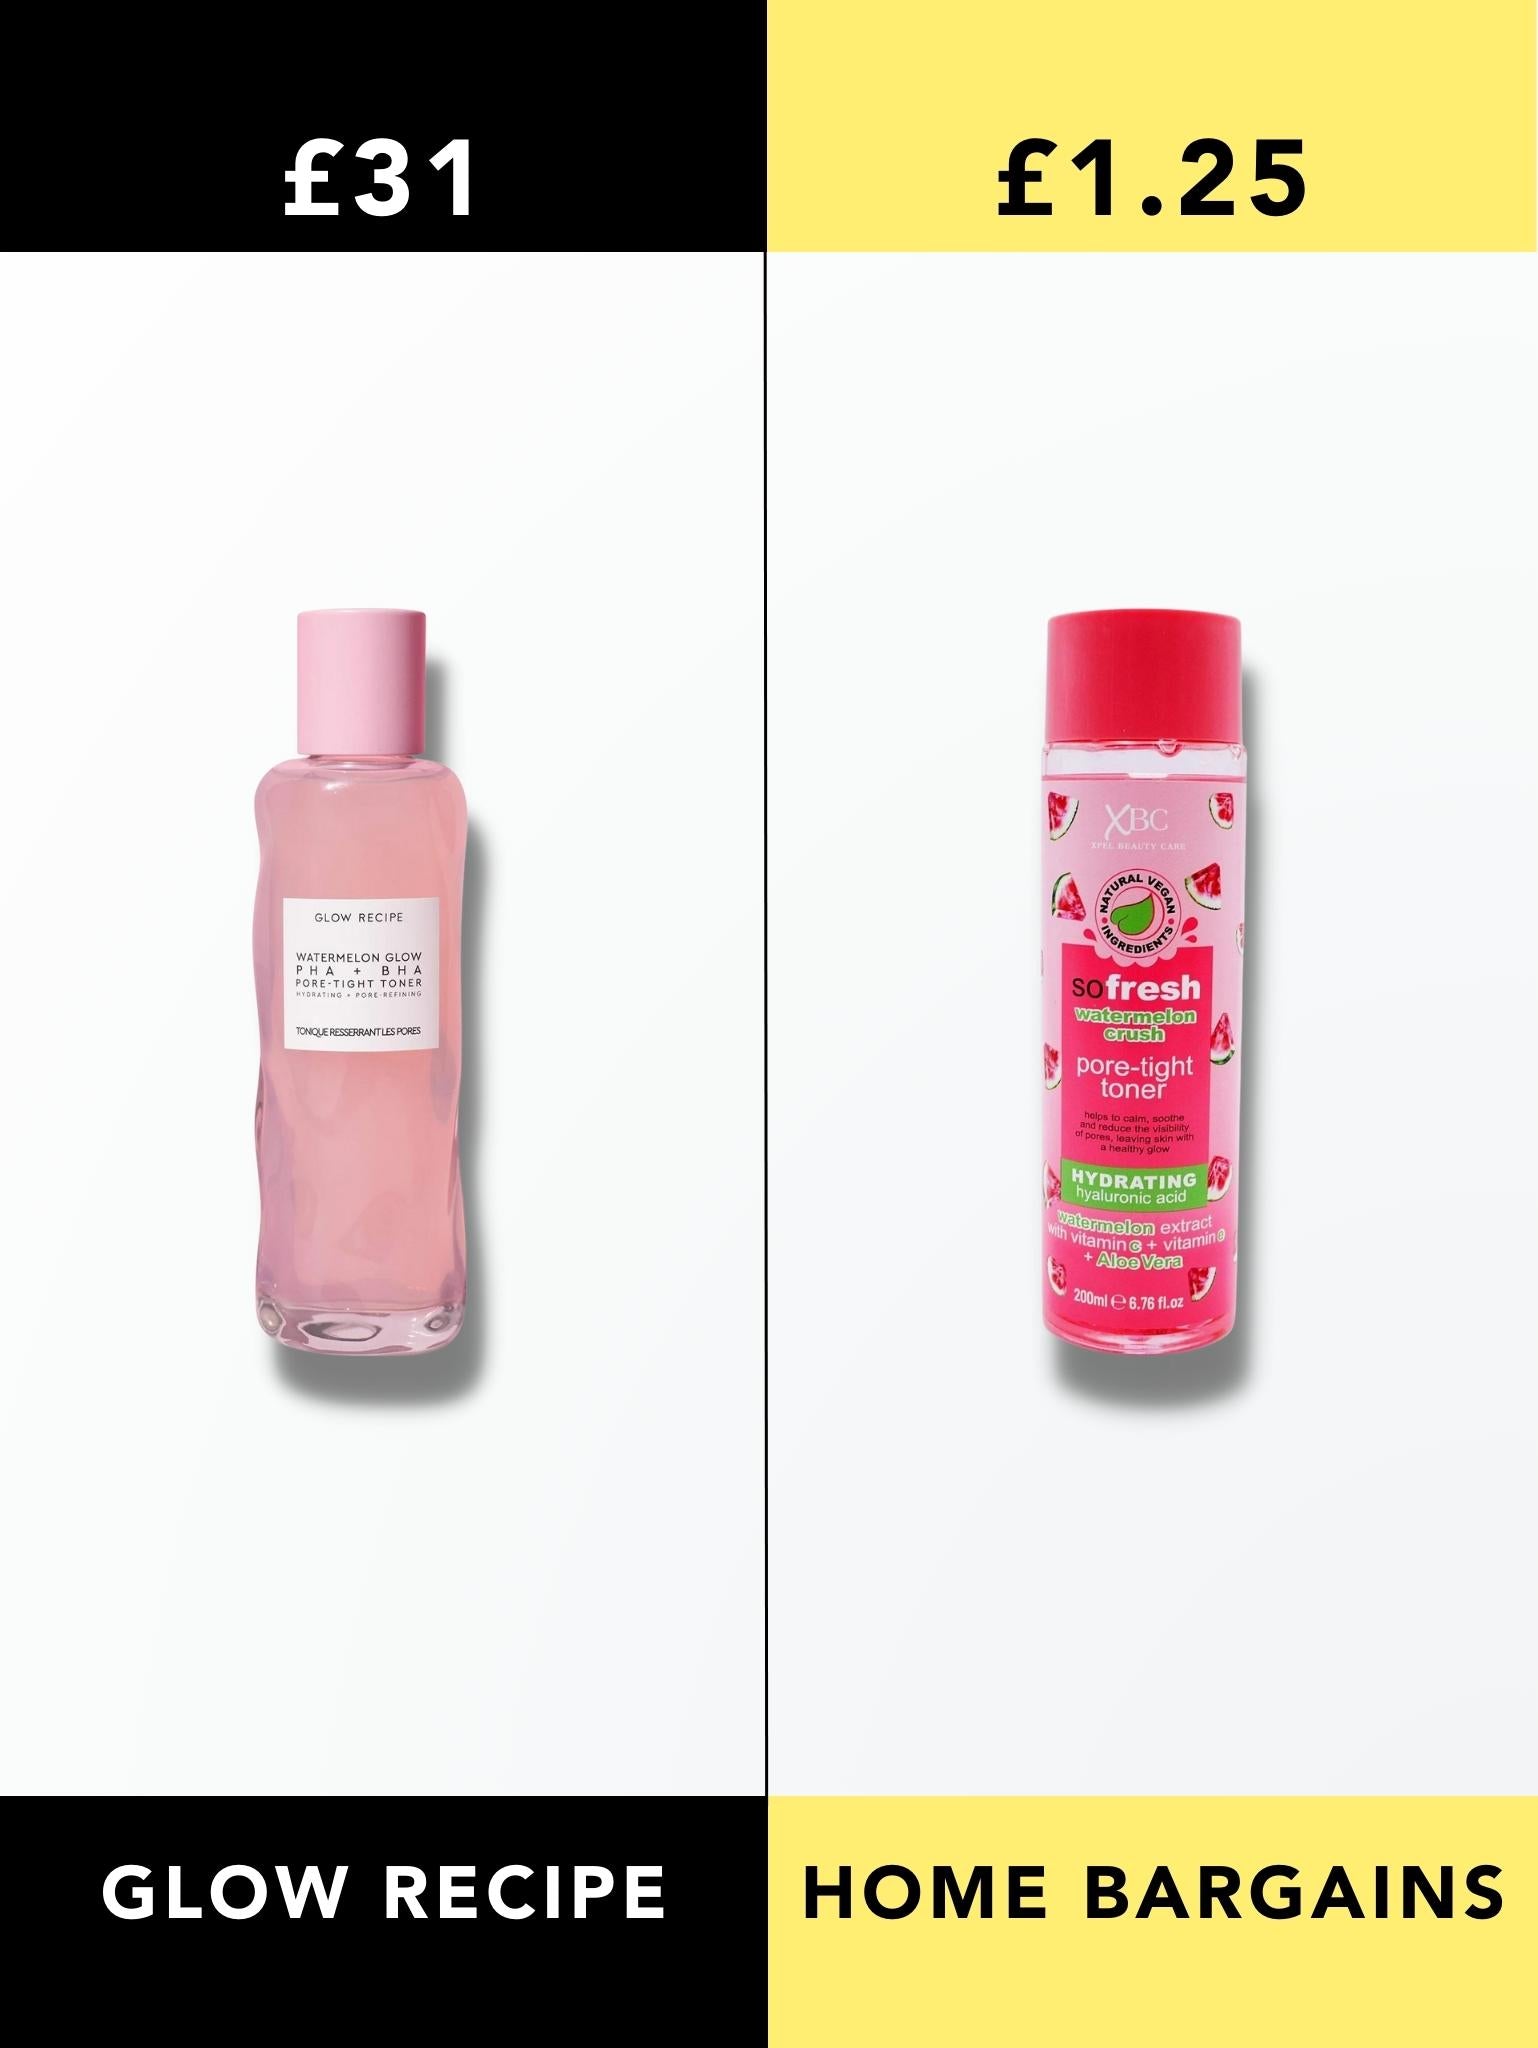 All Skincare Product Comparisons By Experts: High-End vs Dupe – Dupeshop